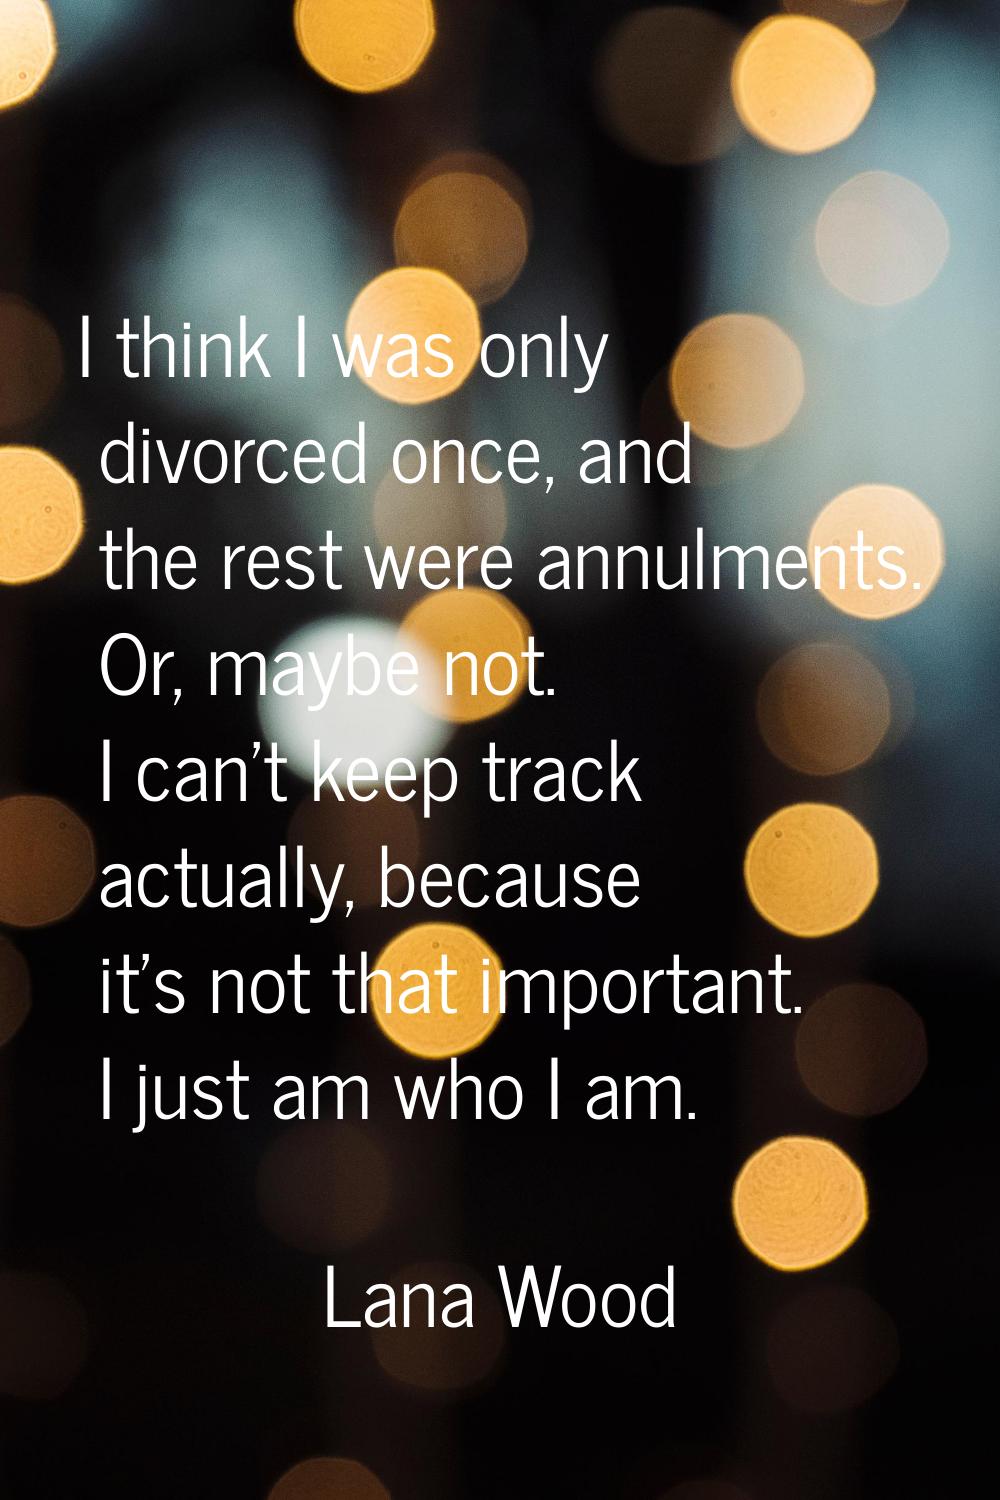 I think I was only divorced once, and the rest were annulments. Or, maybe not. I can't keep track a